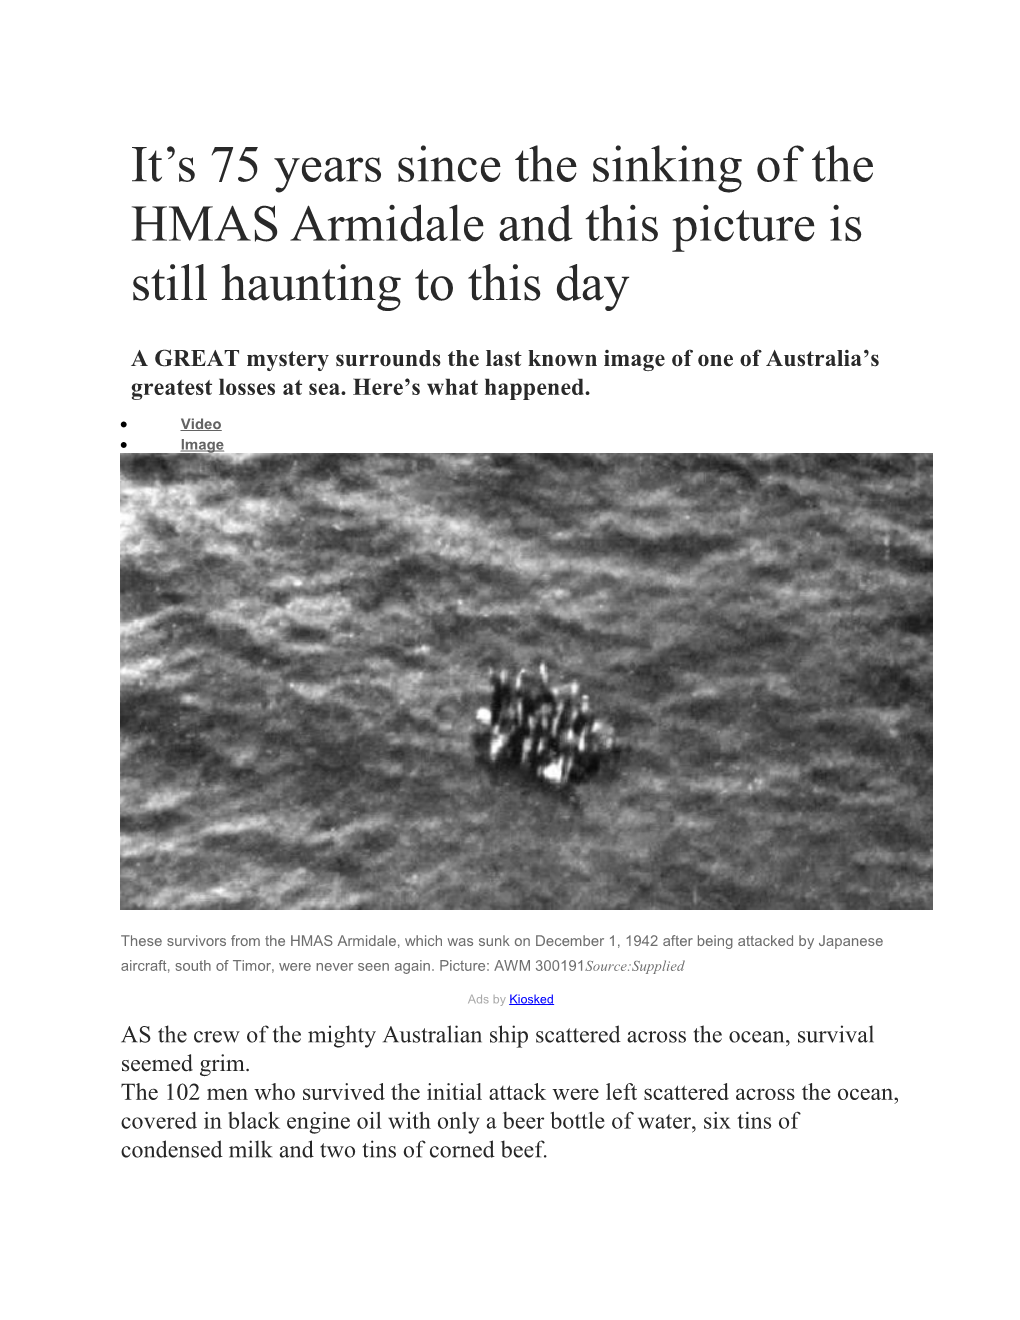 It S 75 Years Since the Sinking of the HMAS Armidale and This Picture Is Still Haunting